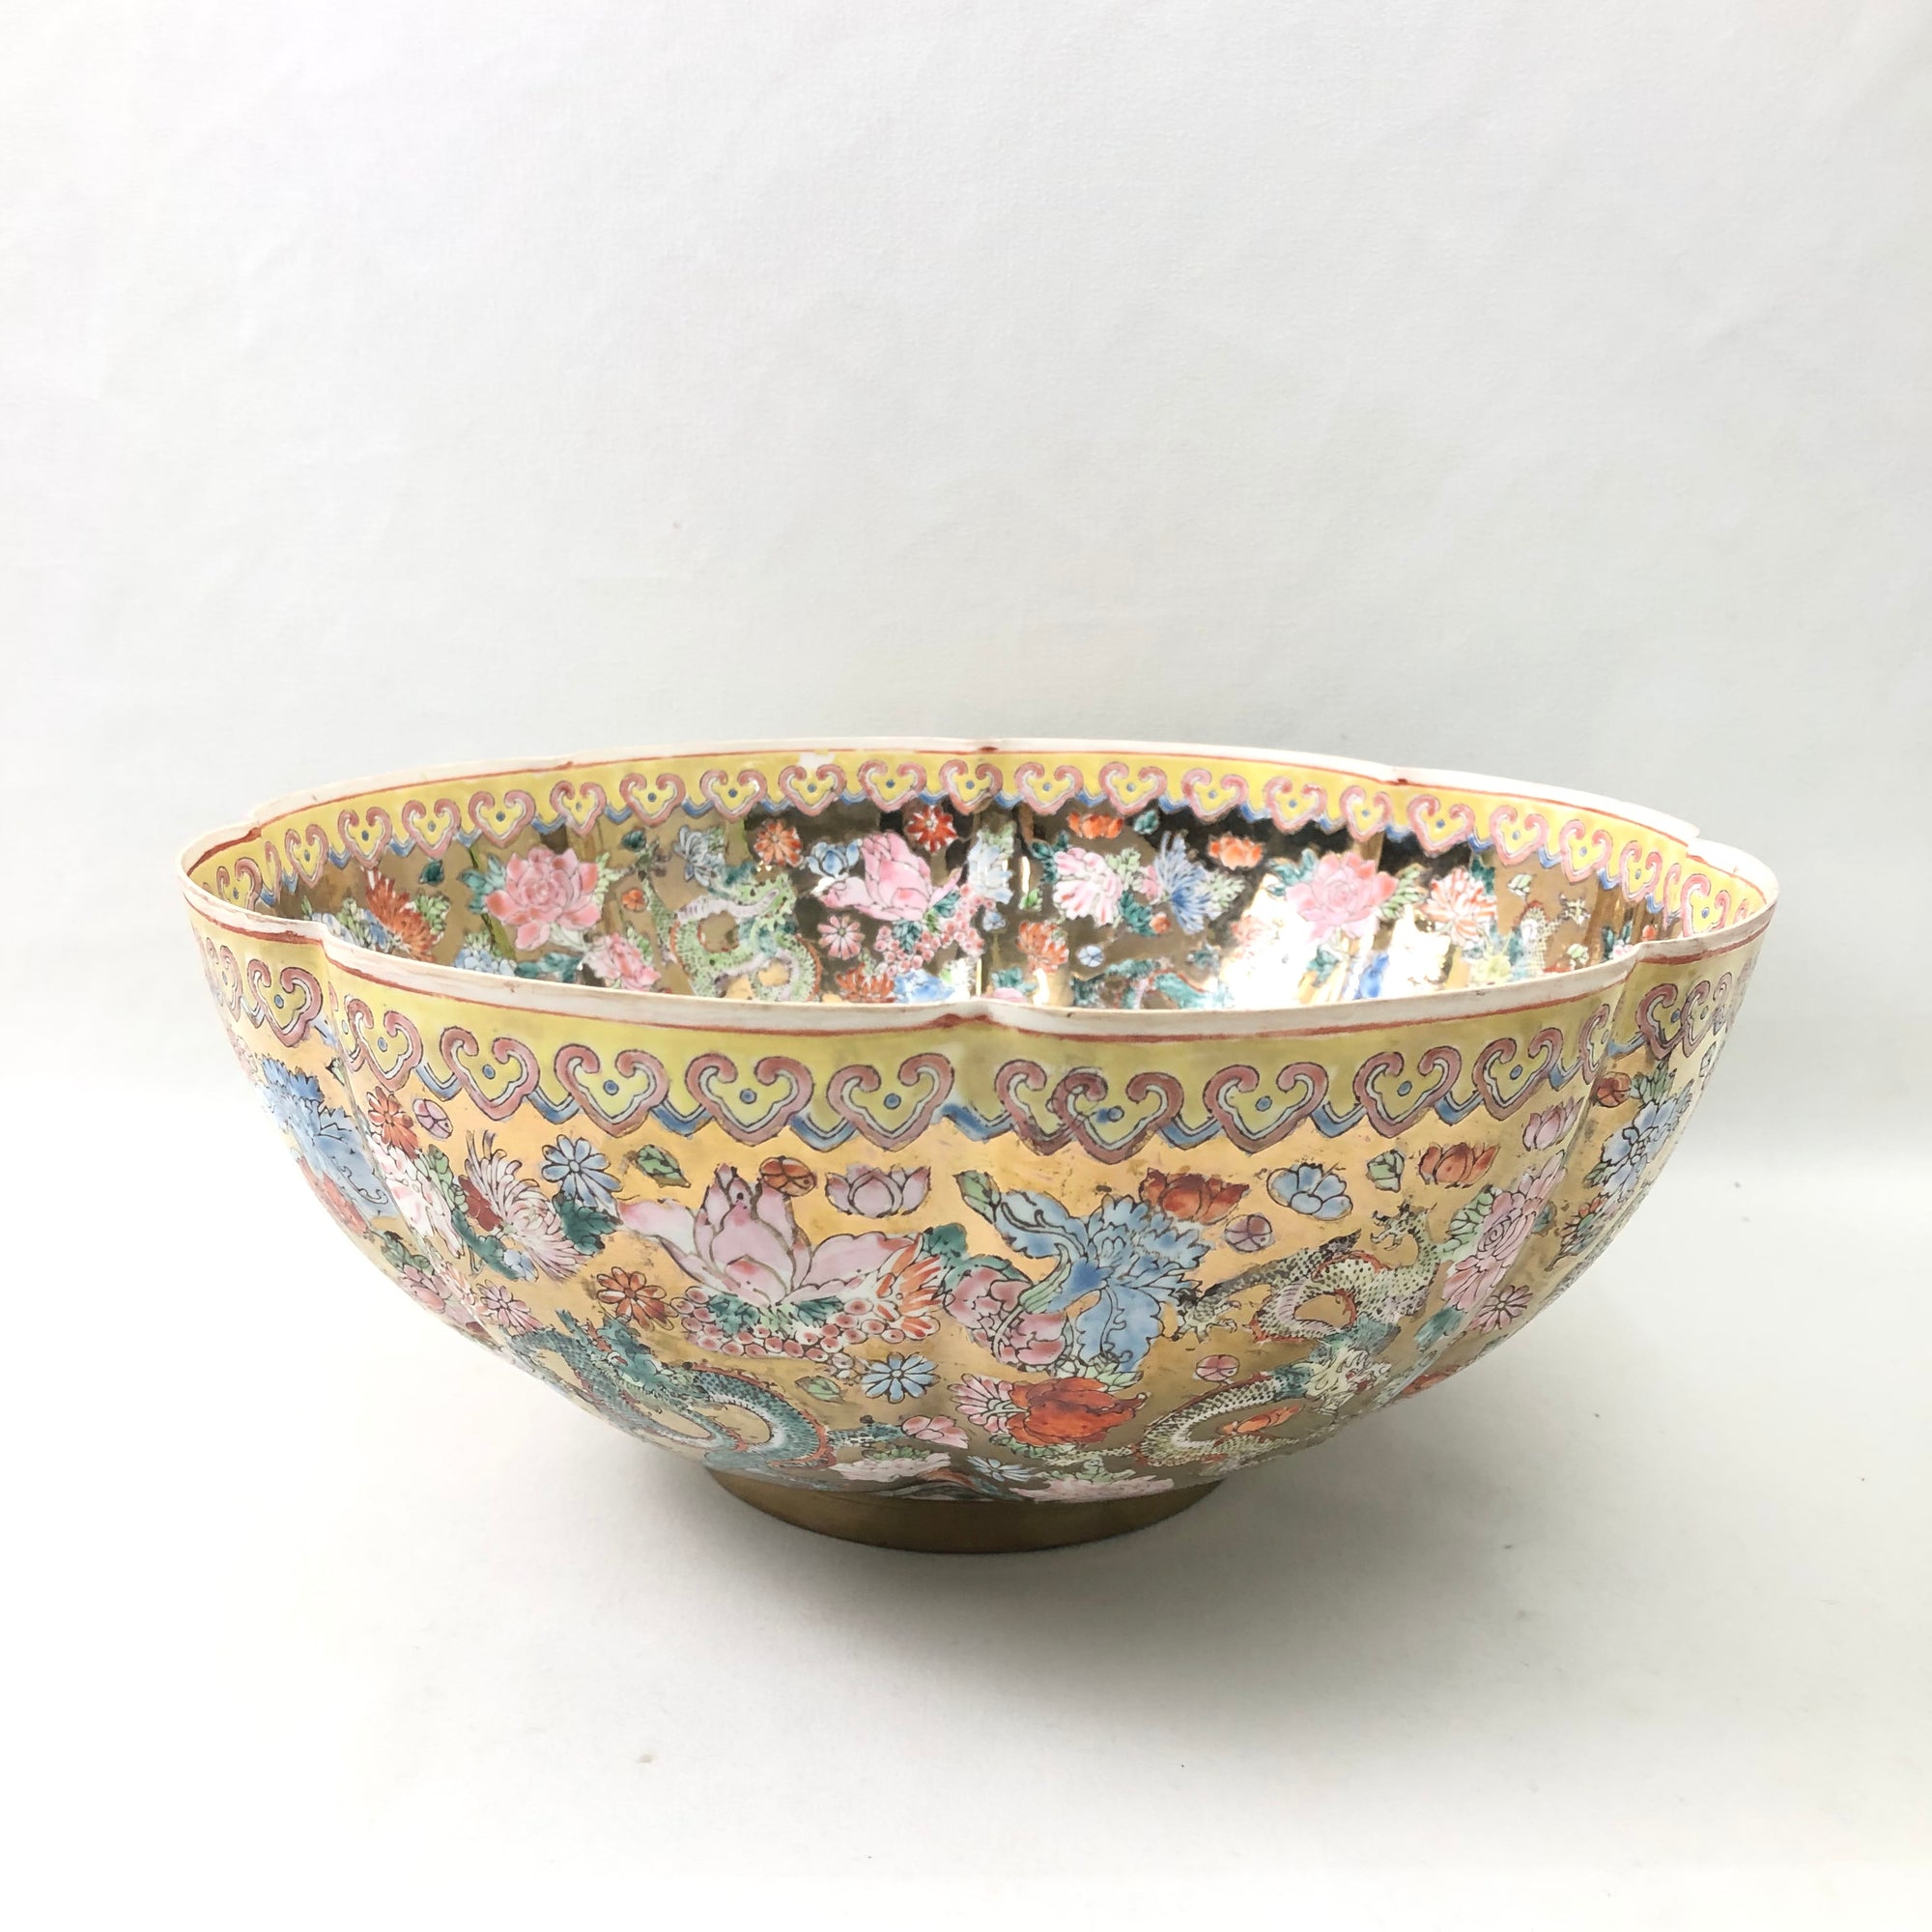 Large Chinese Famille Rose Eggshell Porcelain Bowl with Decorations of Nine Dragons and Flowers on Gold Background, 26.8cm, Mid 20th Century